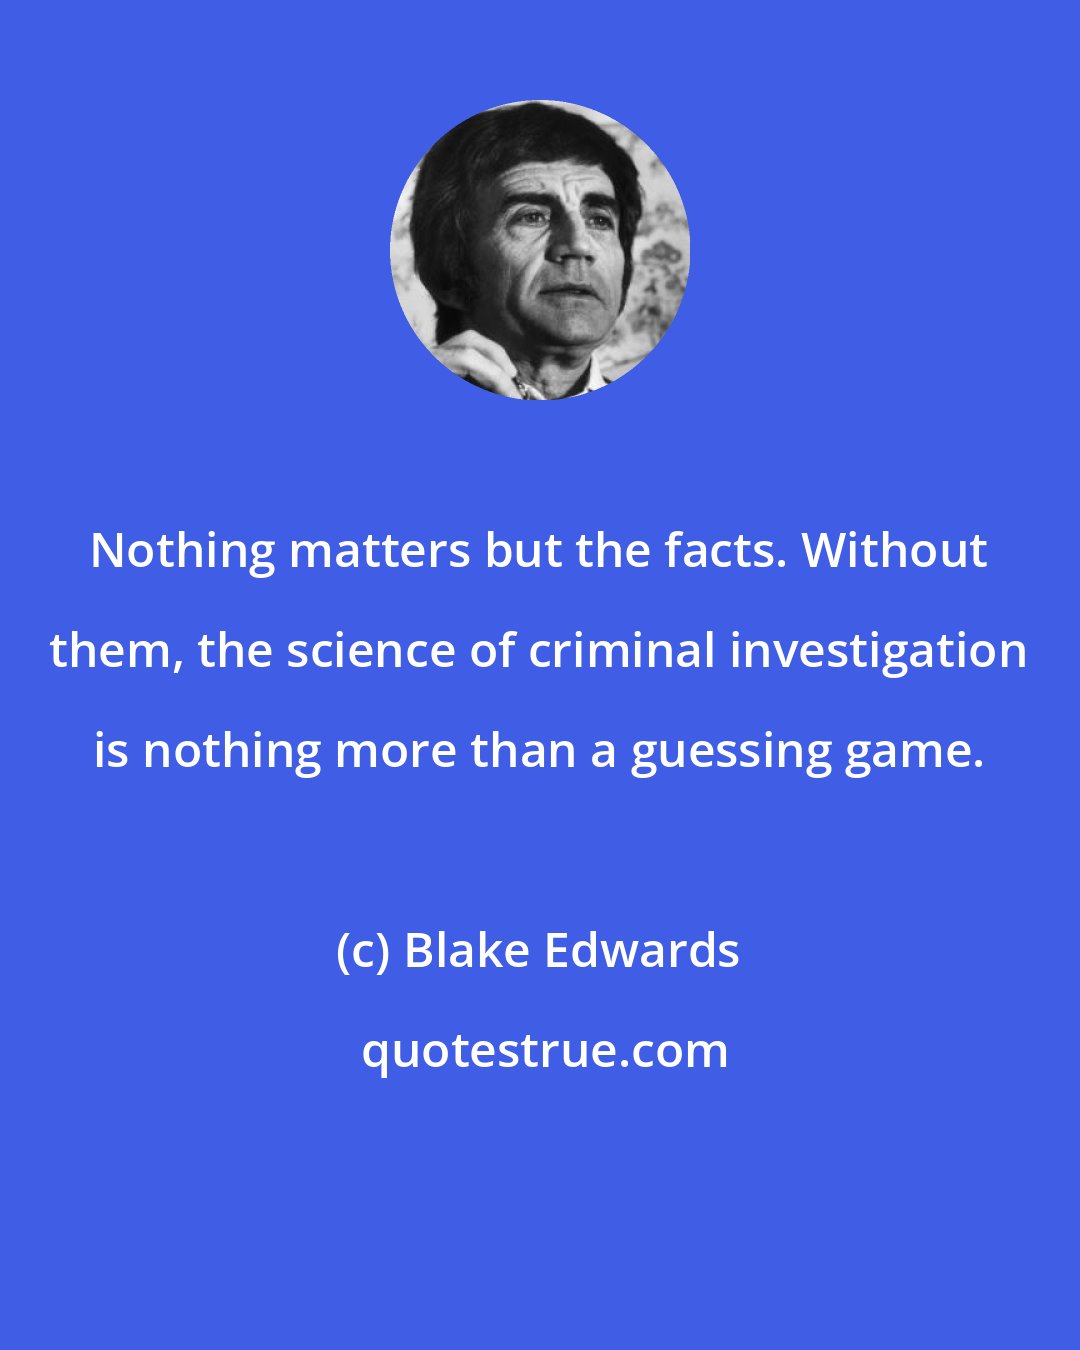 Blake Edwards: Nothing matters but the facts. Without them, the science of criminal investigation is nothing more than a guessing game.